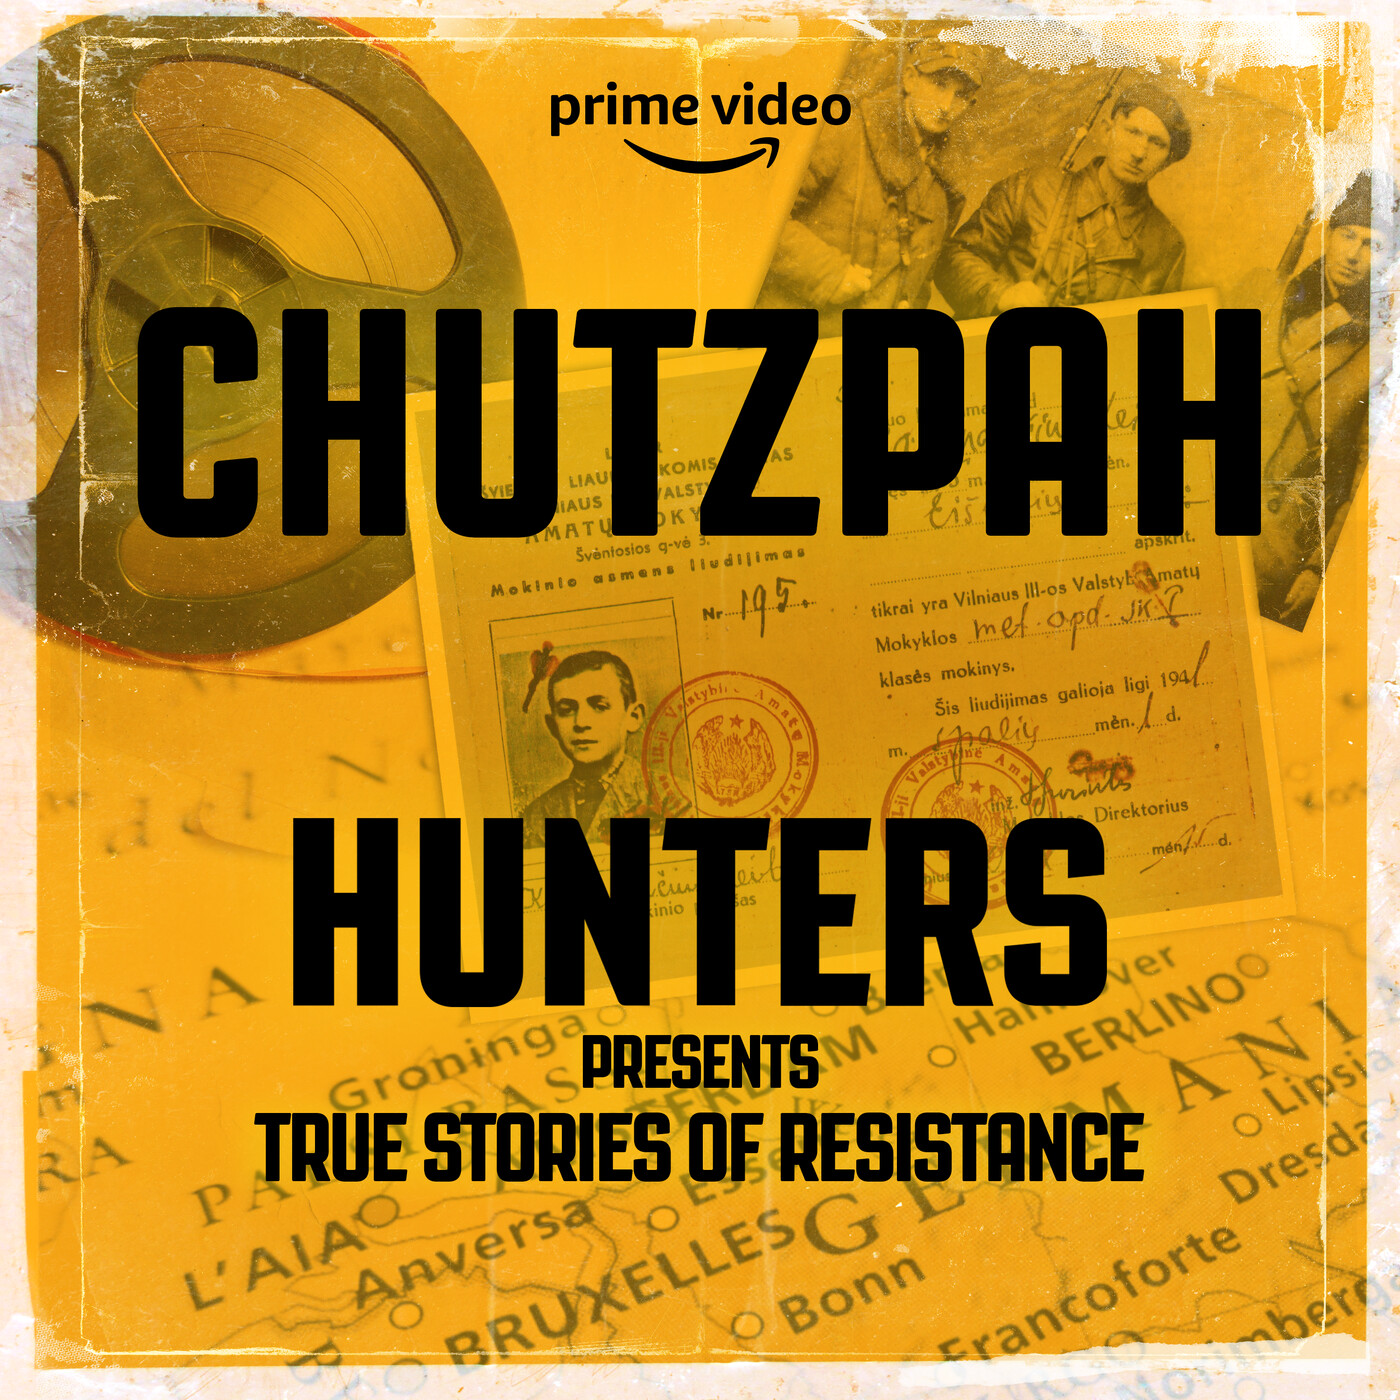 Chutzpah Archives - TLV1 Podcasts